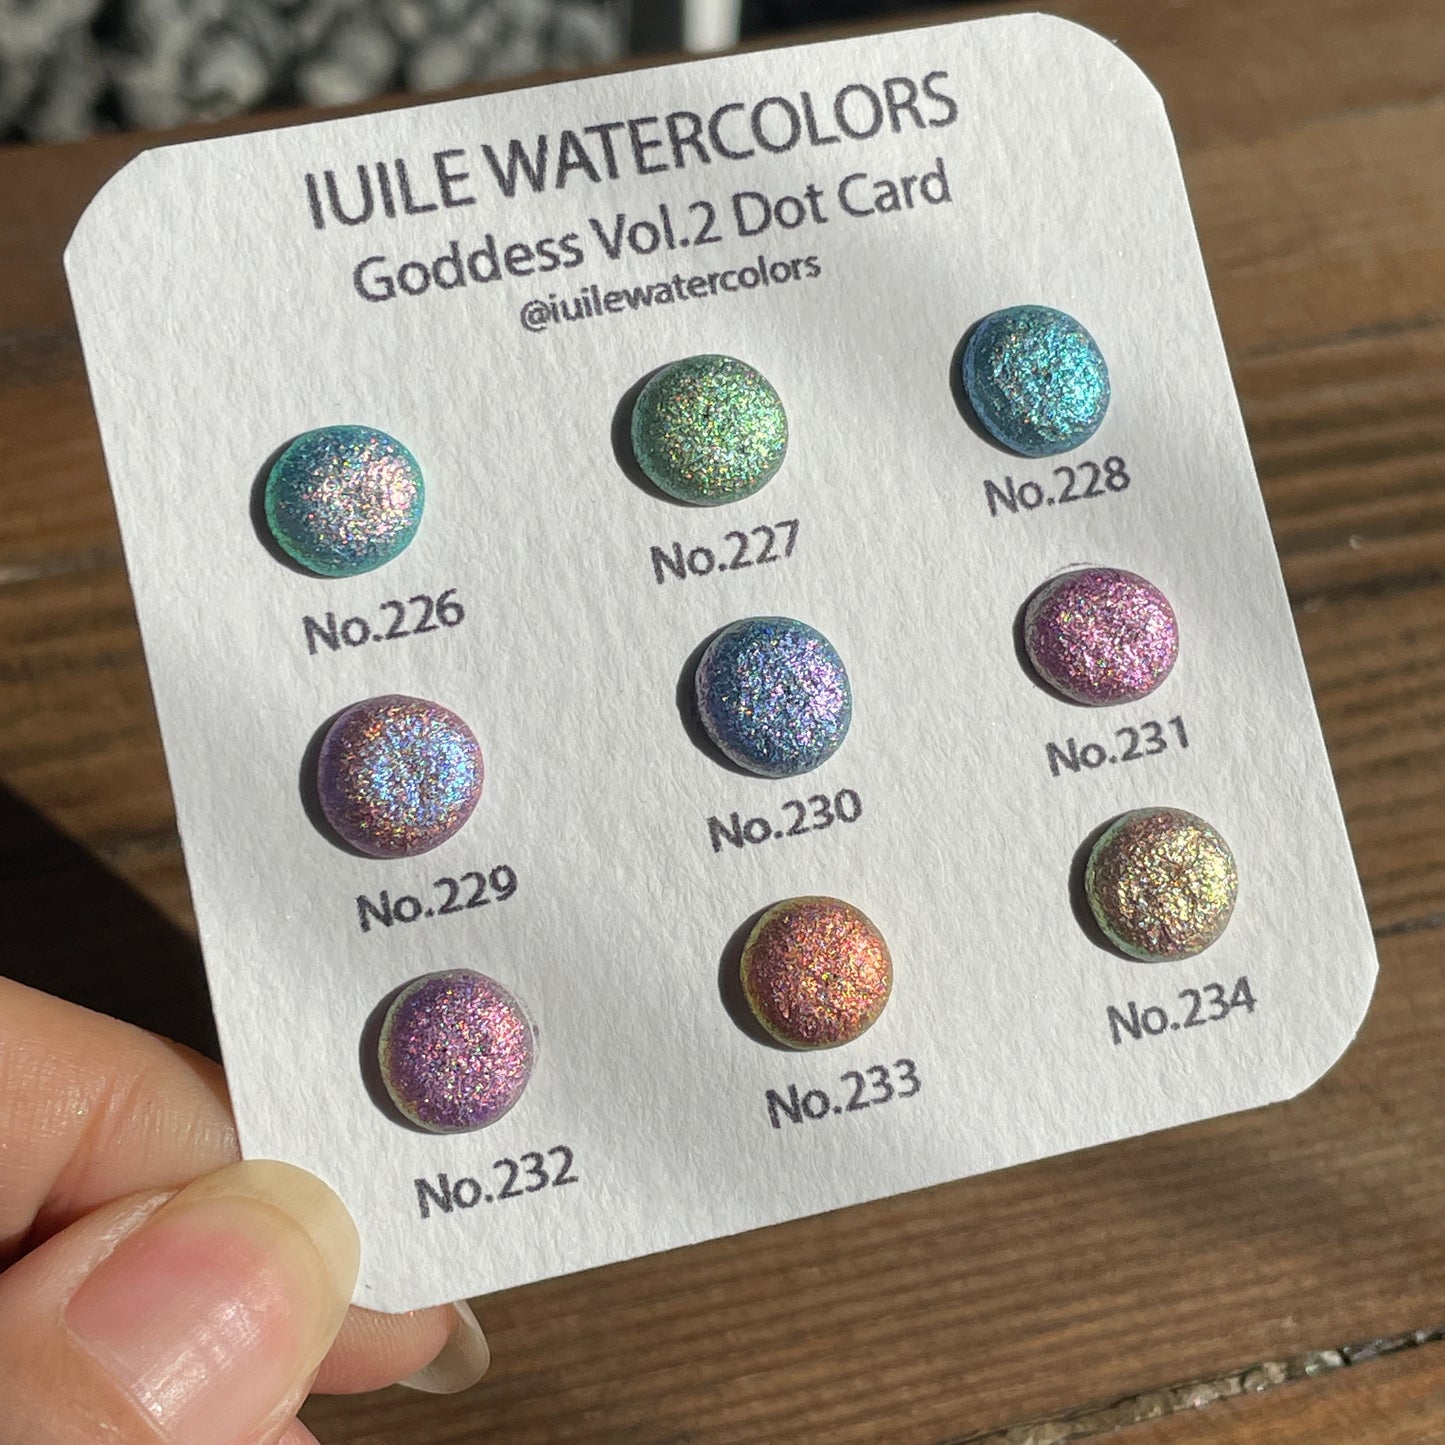 Limited Vol.2 Goddess Drop Card Tester Handmade Super Shift Aurora Shimmer Holographic Watercolor Paints by iuilewatercolors